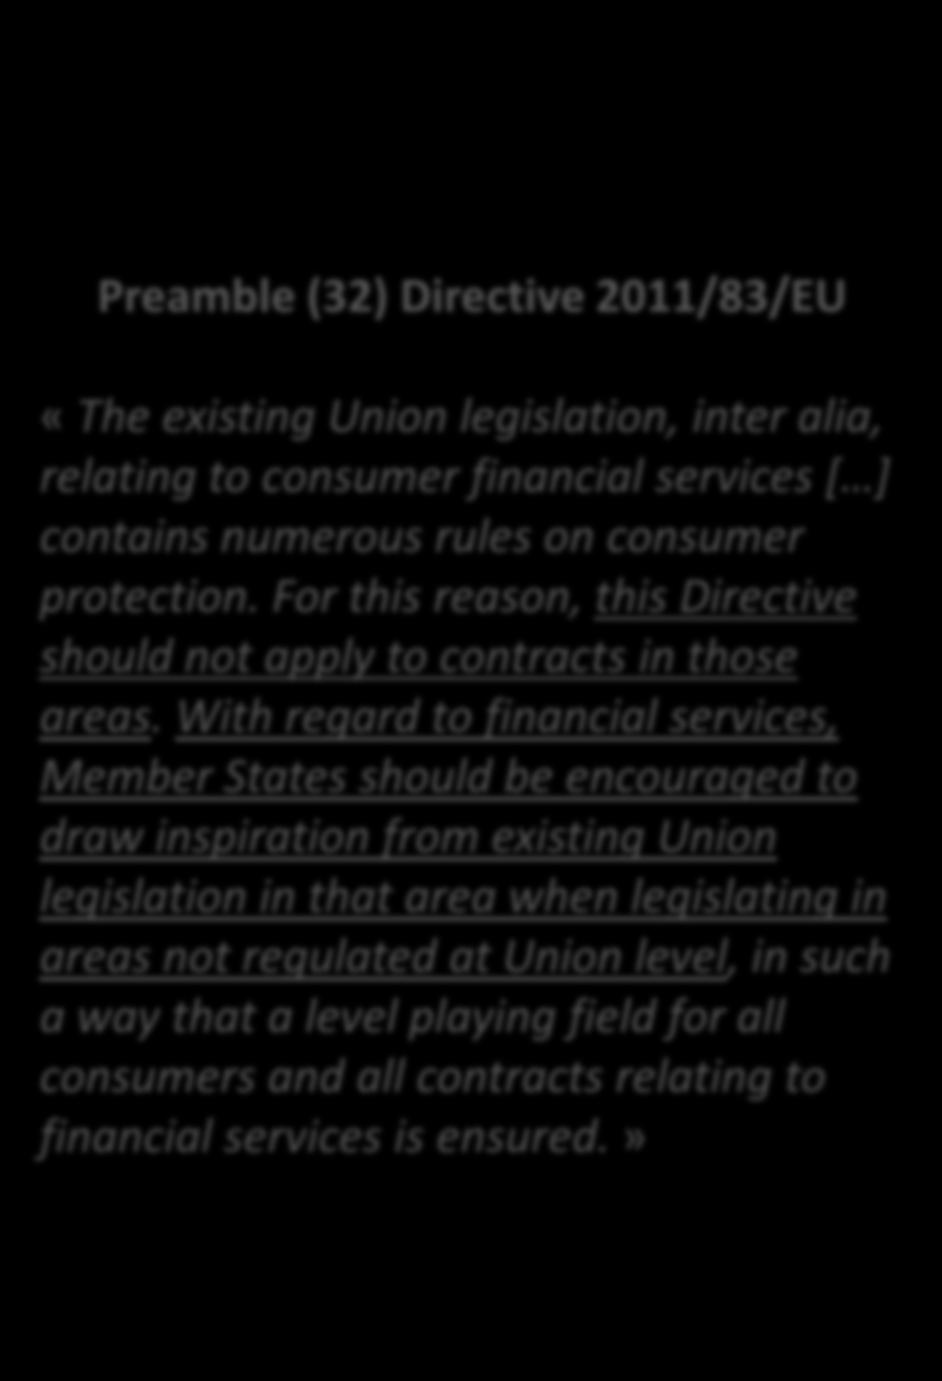 Focus on two important developments Off-premises contracts (1/4) The new rules on off-premises contracts implement Directive 2011/83/EU However, Preamble (32) states that «this Directive should not